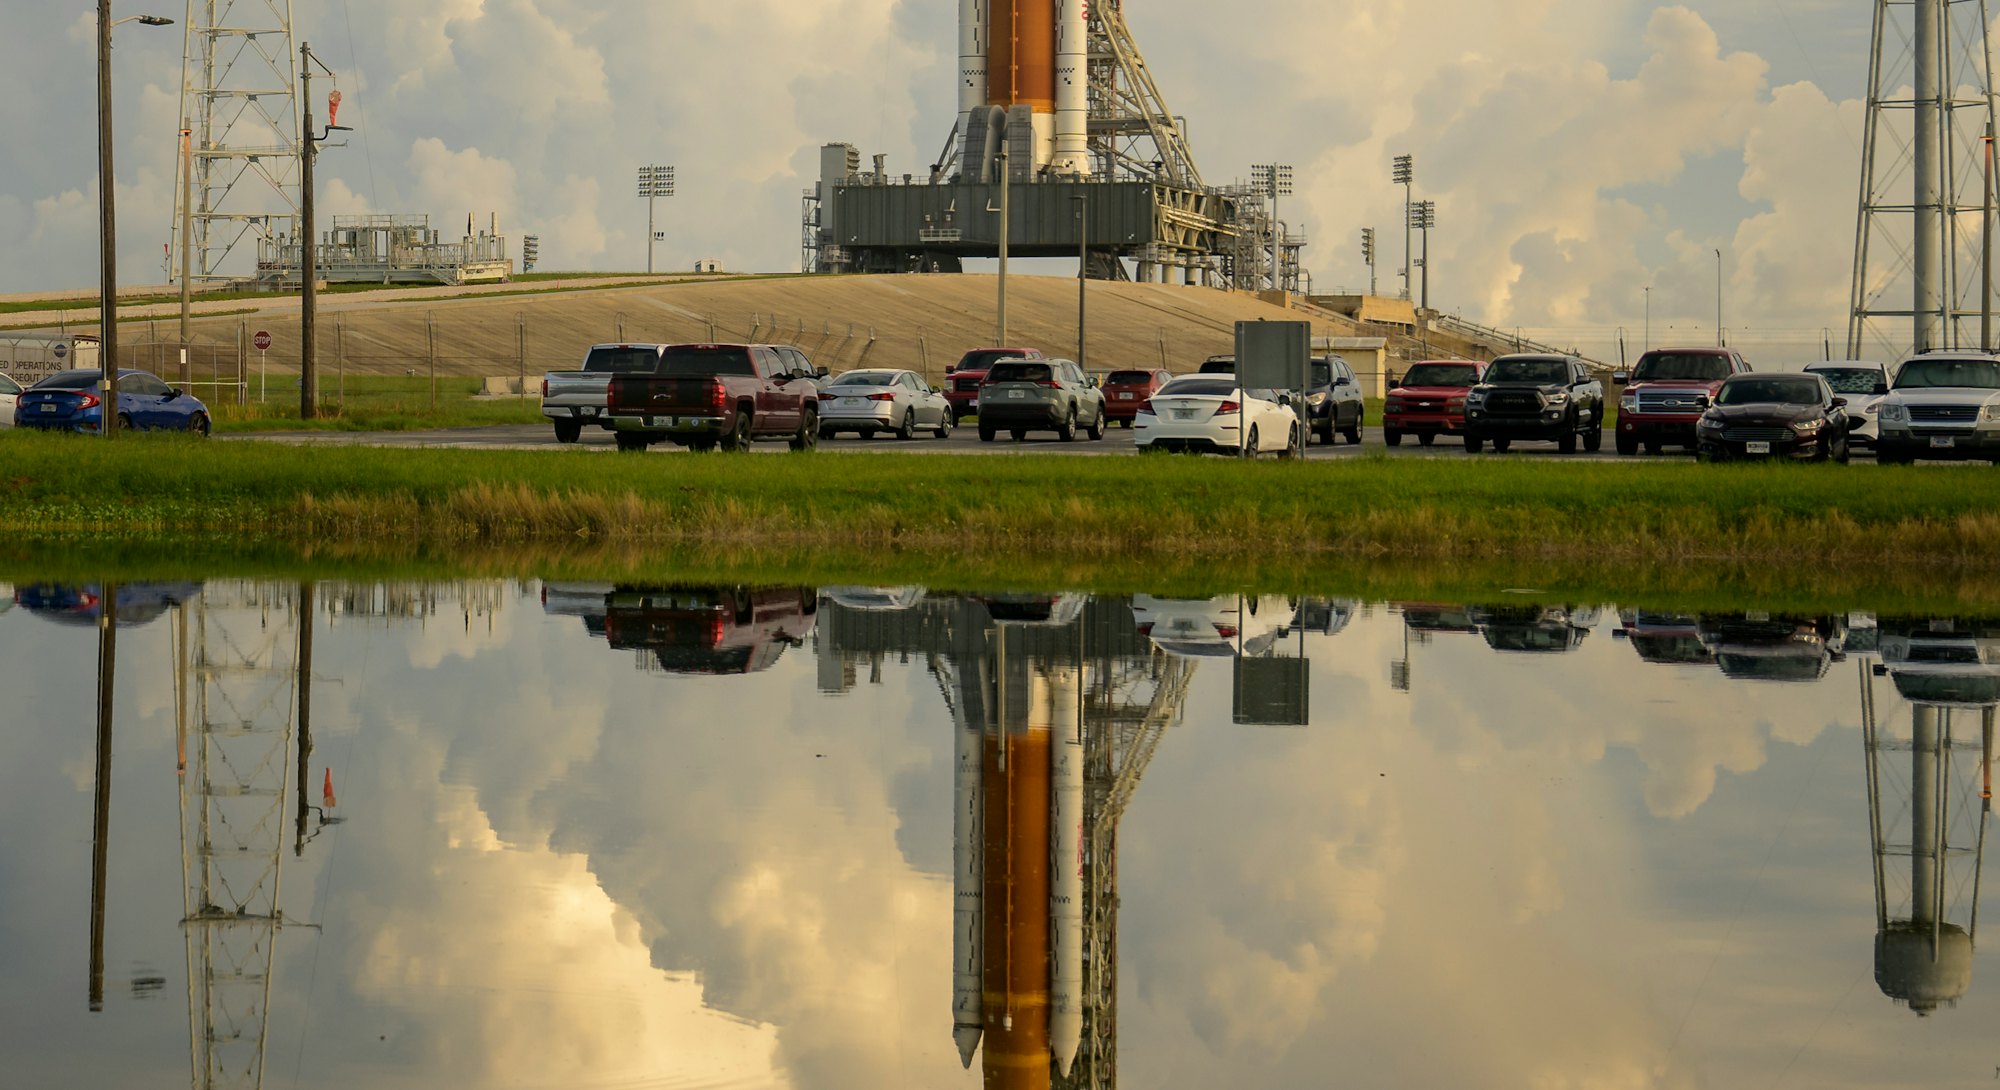 CAPE CANAVERAL, FLORIDA - SEPTEMBER 2: In this handout image provided by NASA, NASA's Space Launch S...